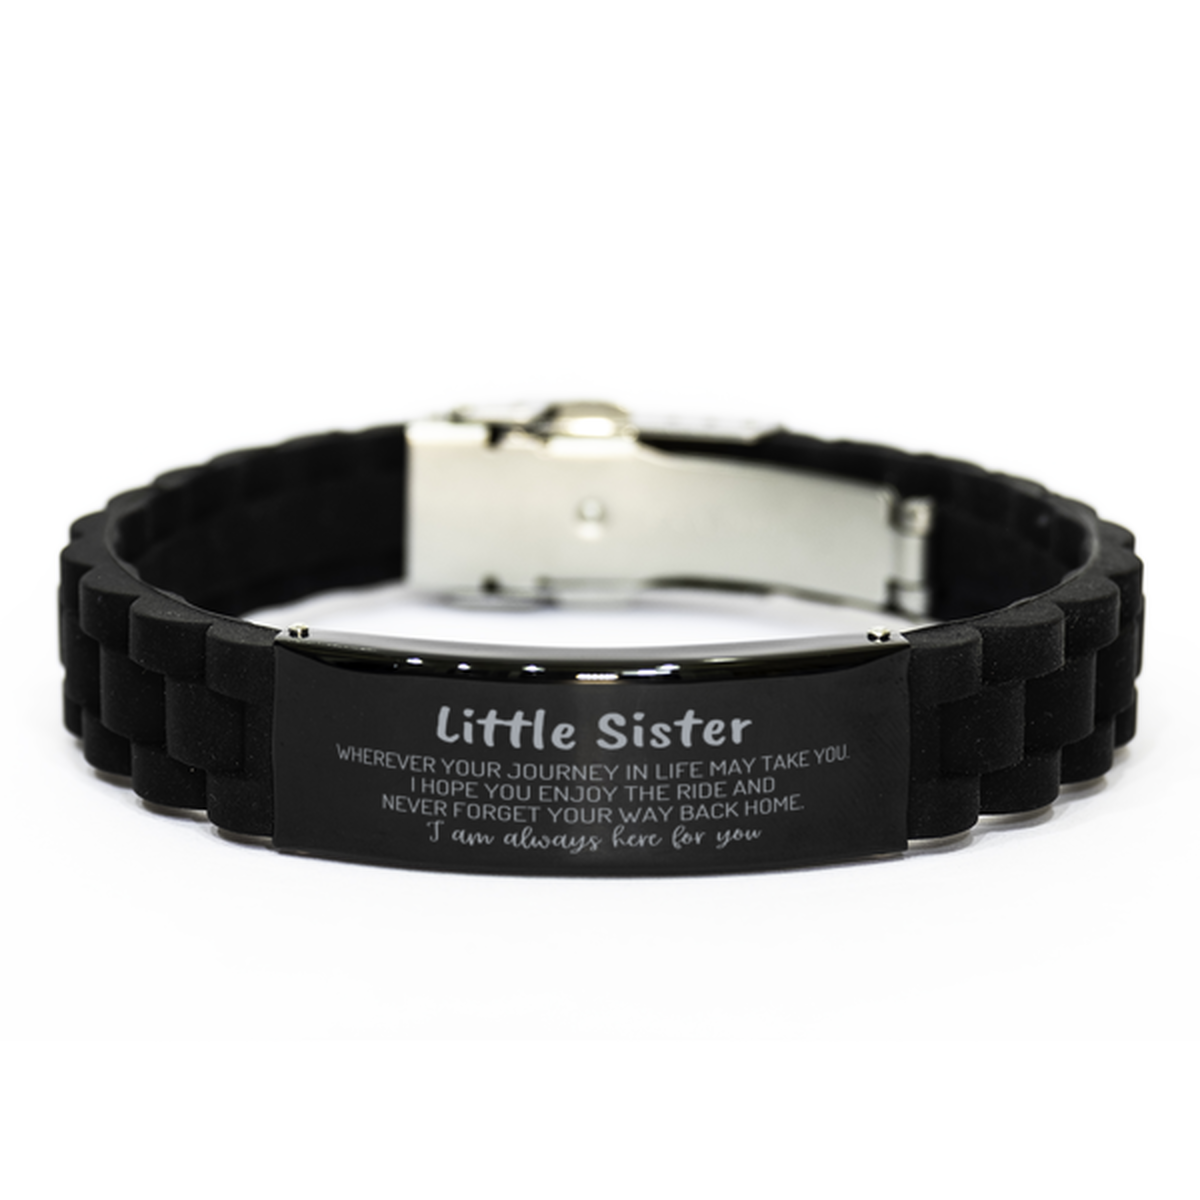 Little Sister wherever your journey in life may take you, I am always here for you Little Sister Black Glidelock Clasp Bracelet, Awesome Christmas Gifts For Little Sister, Little Sister Birthday Gifts for Men Women Family Loved One